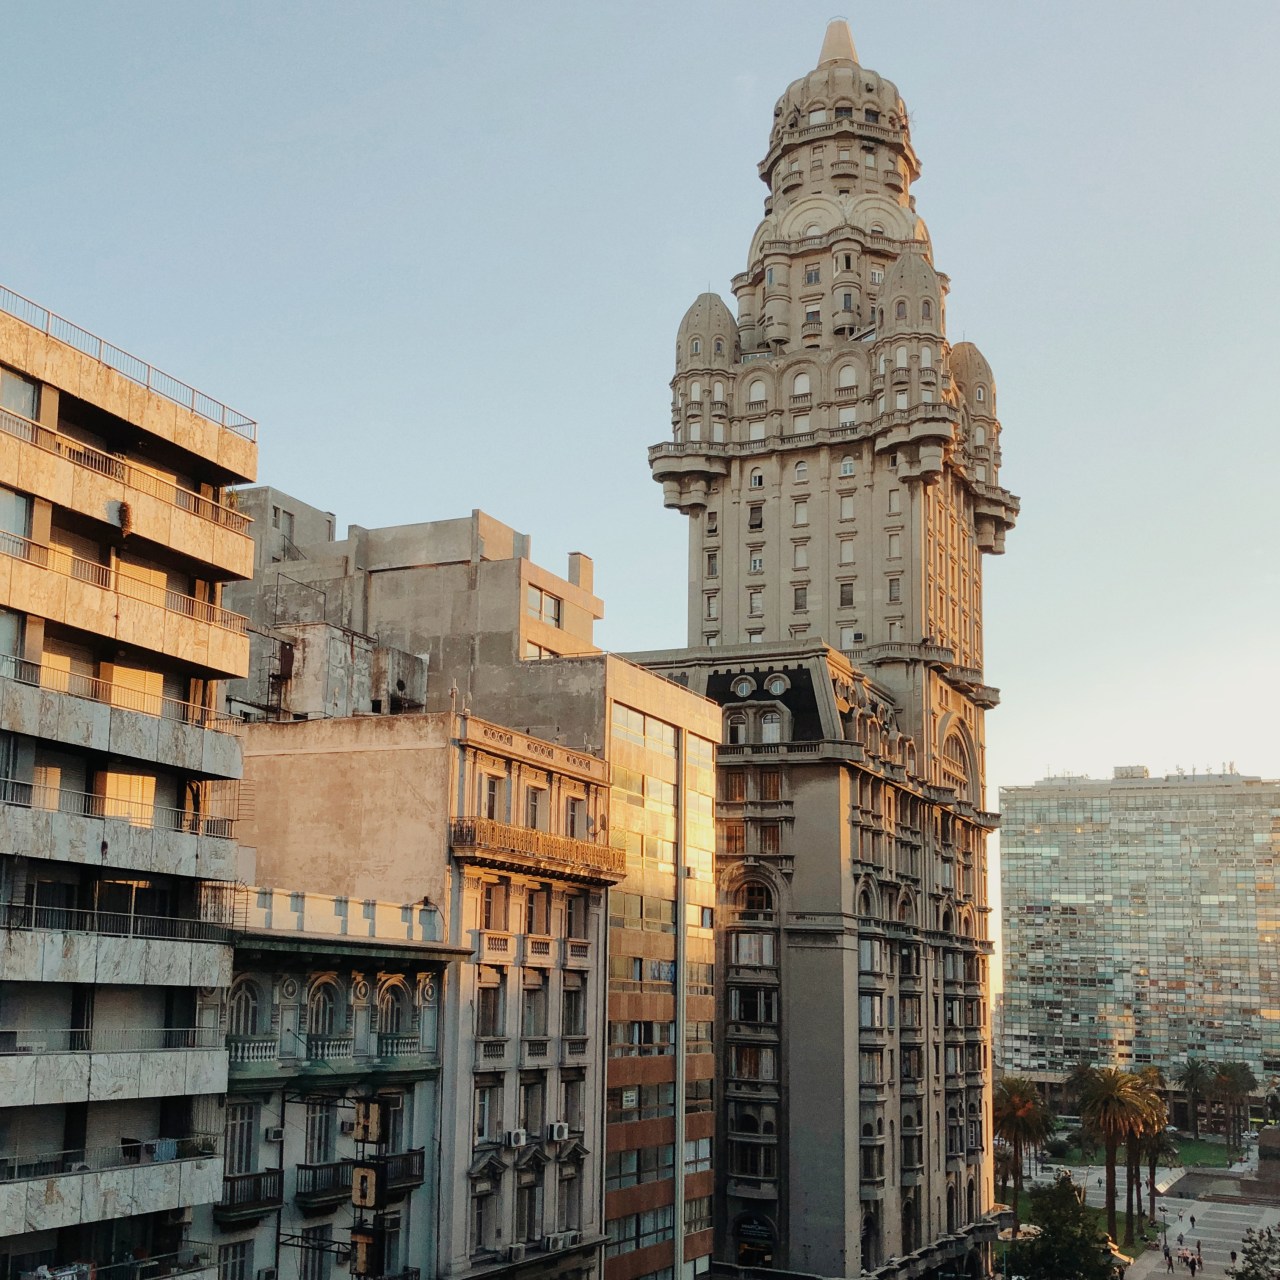 Palacio Salvo sits at the intersection of 18 de Julio Avenue and Plaza Independencia in Montevideo.